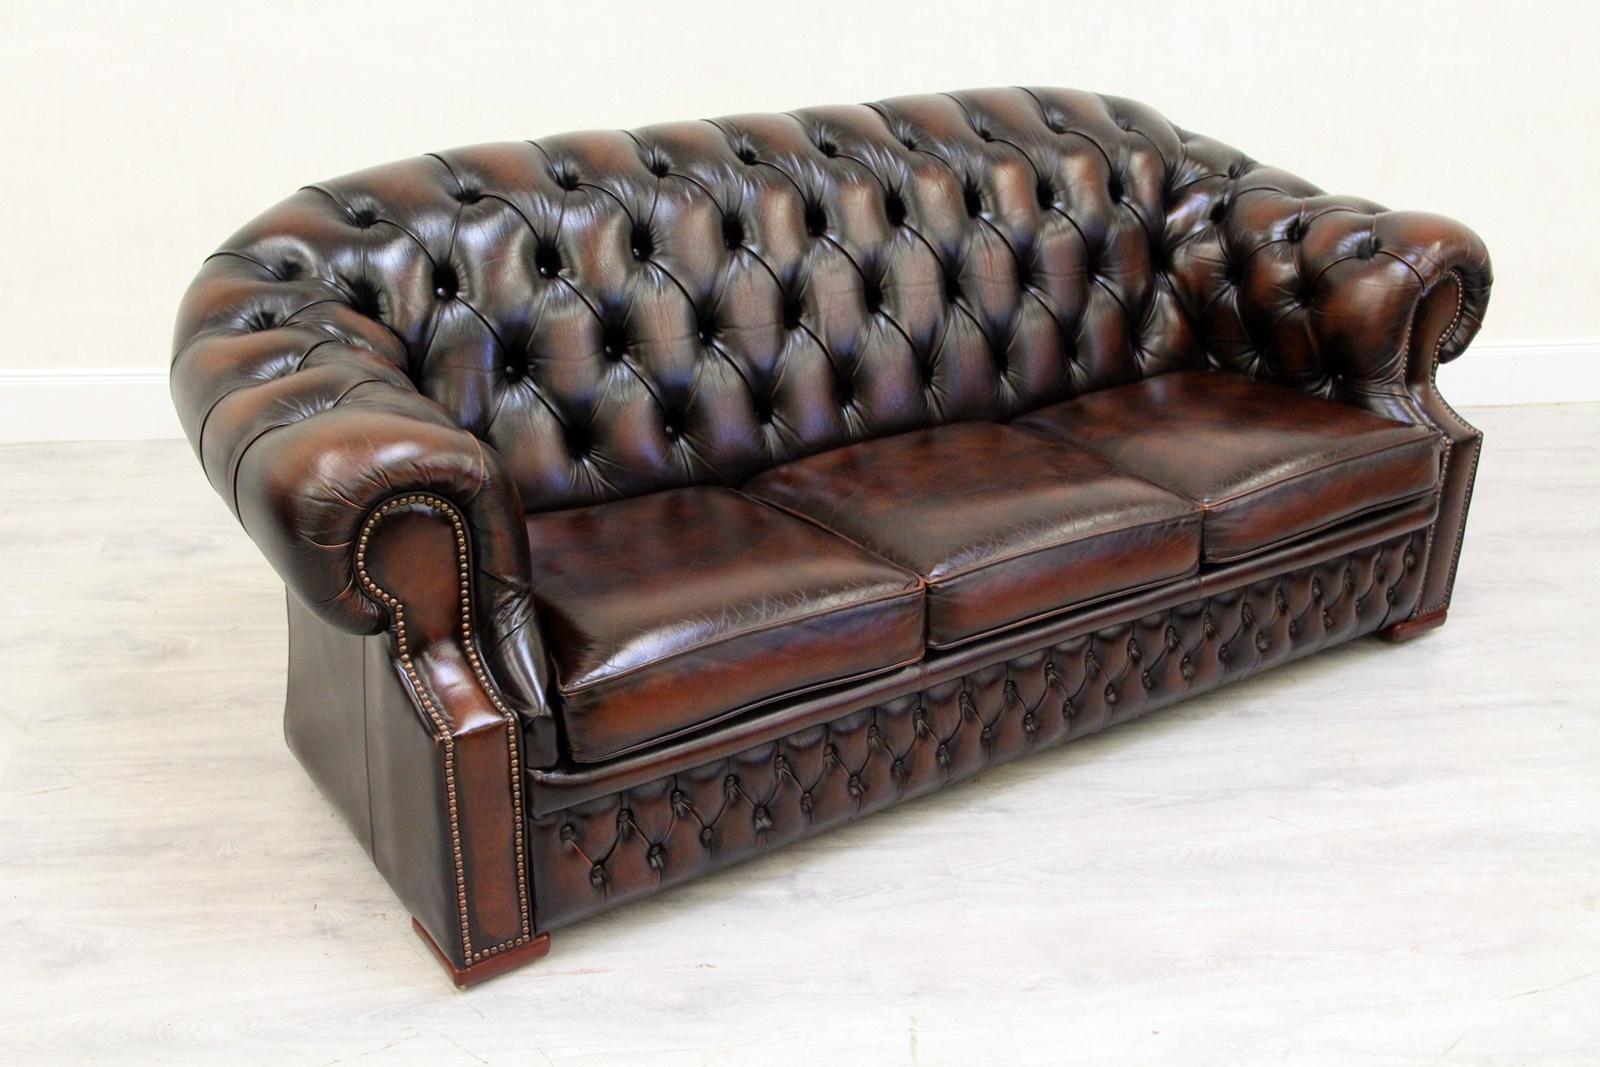 Late 20th Century Chesterfield Centurion Sofa Leather Antique Vintage Couch English For Sale